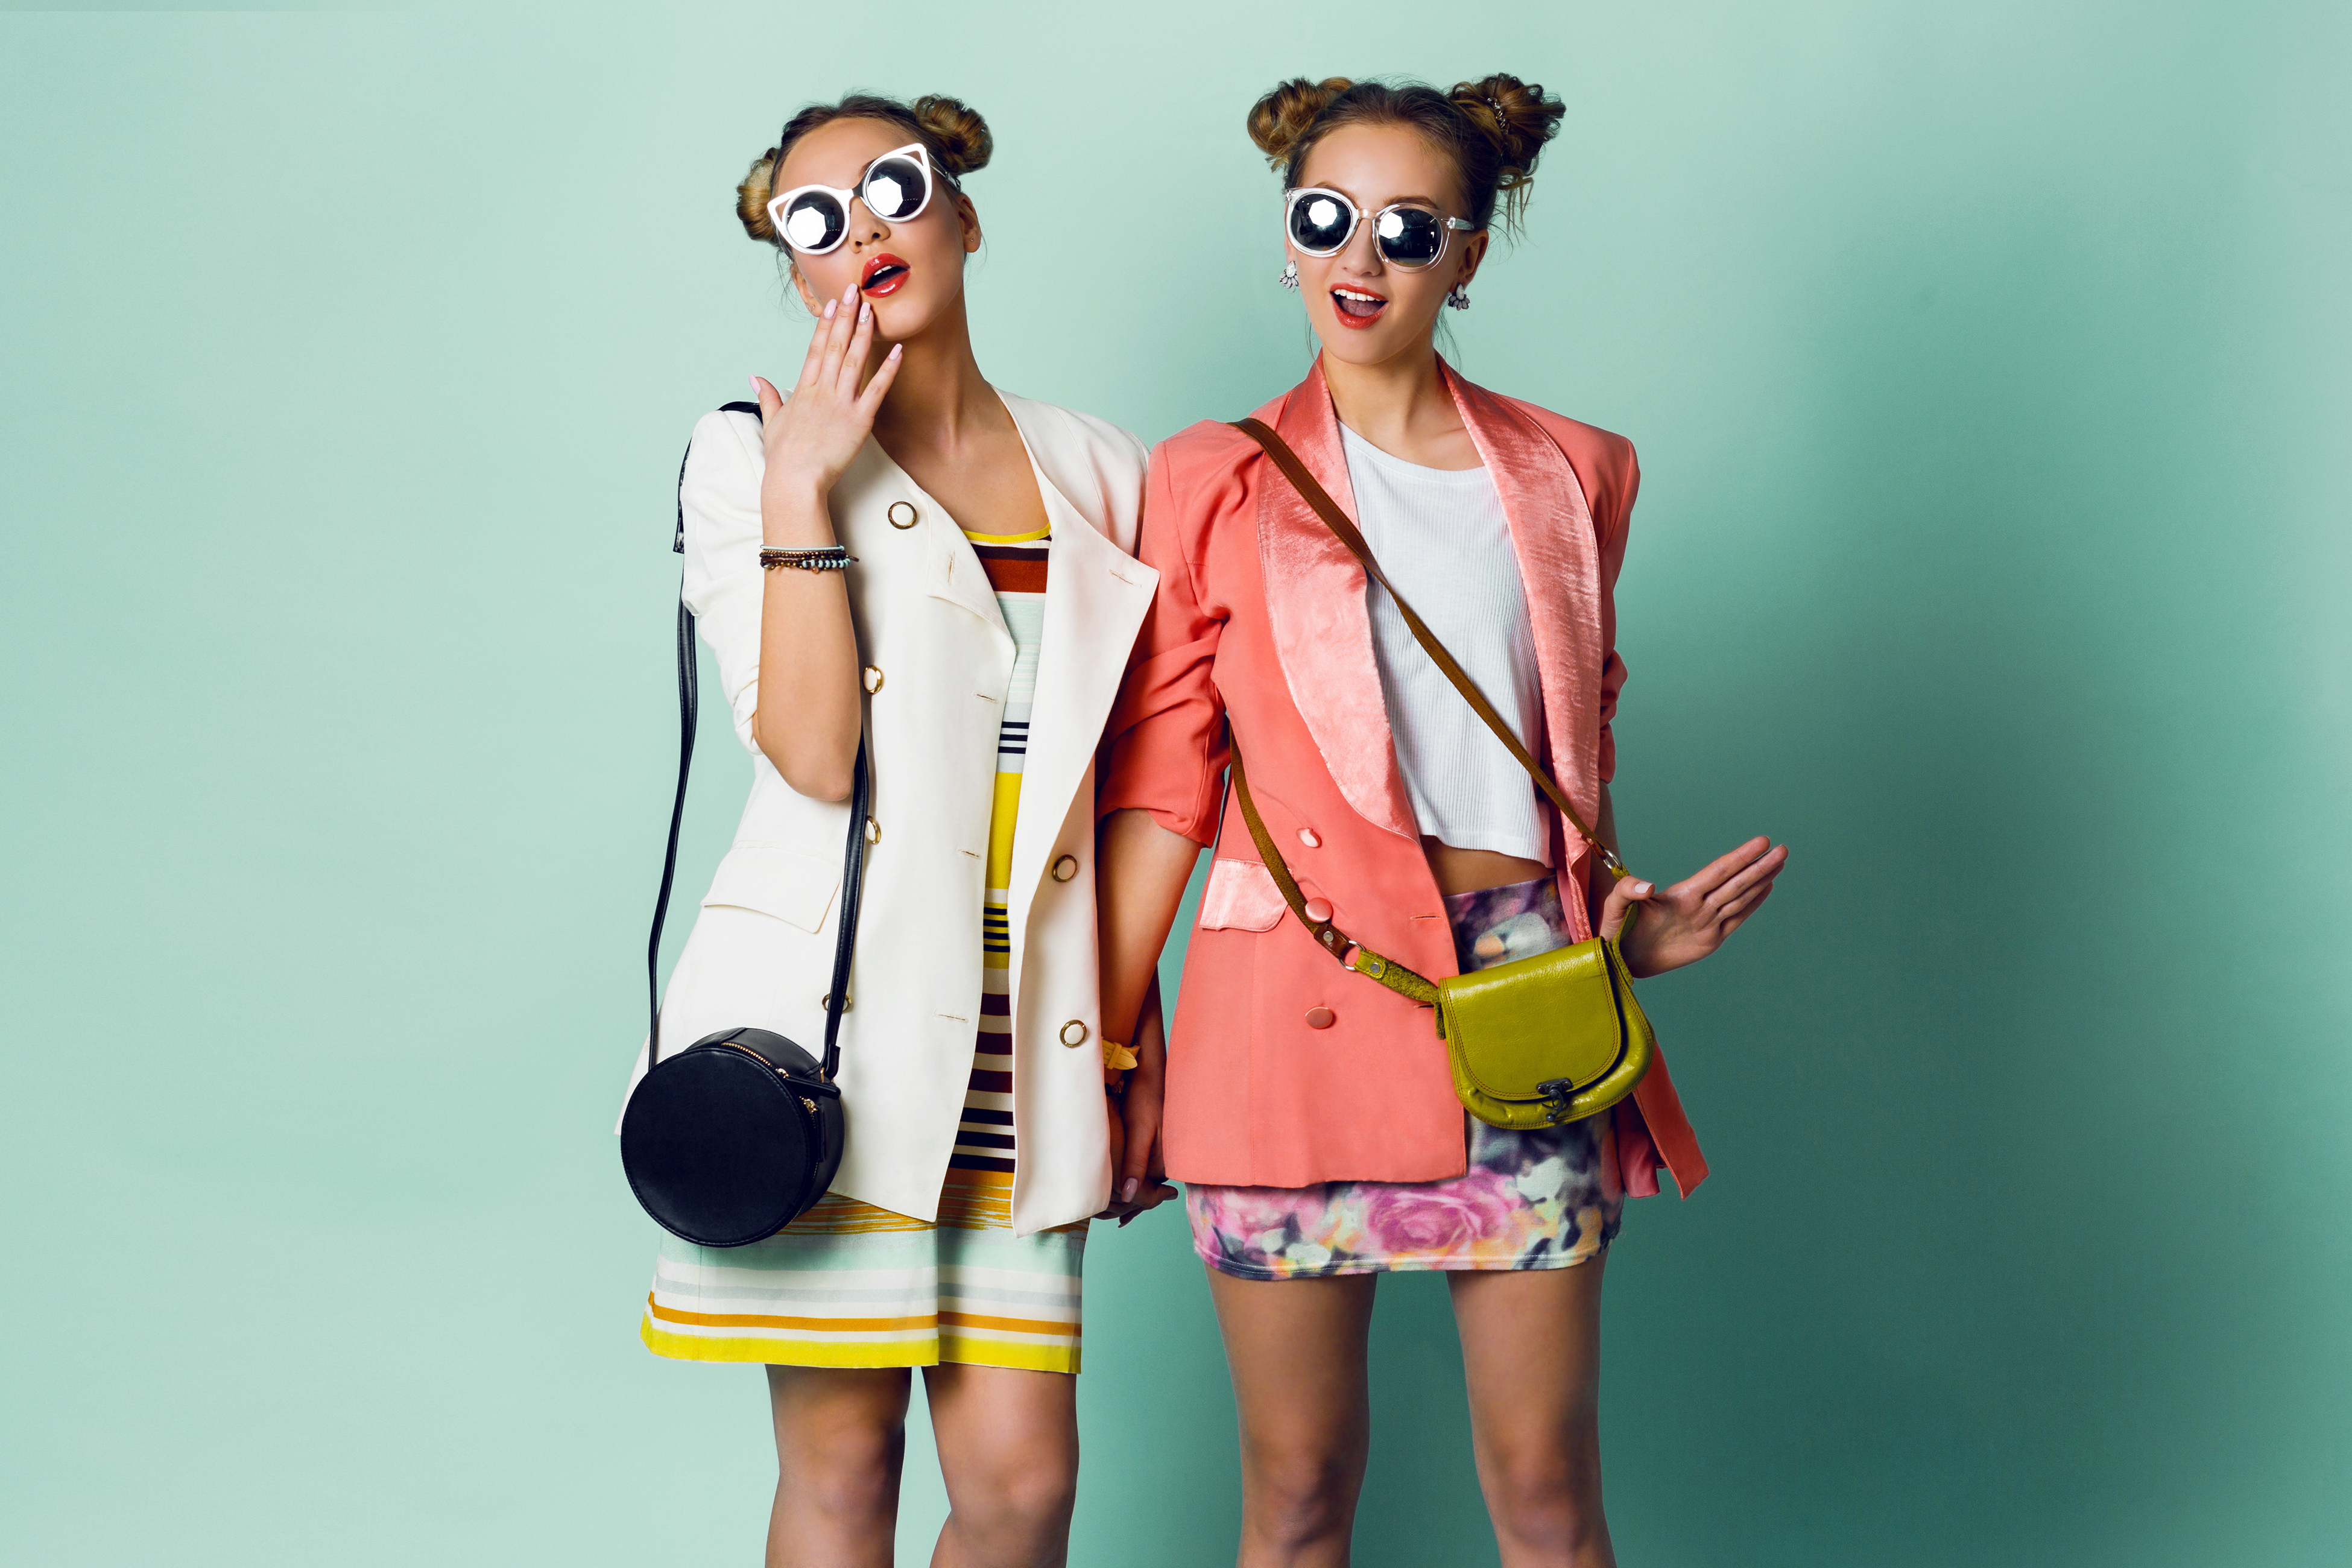 Two sisters with horns hairstyles wearing stylish jackets and funky sunglasses | Source: Shutterstock